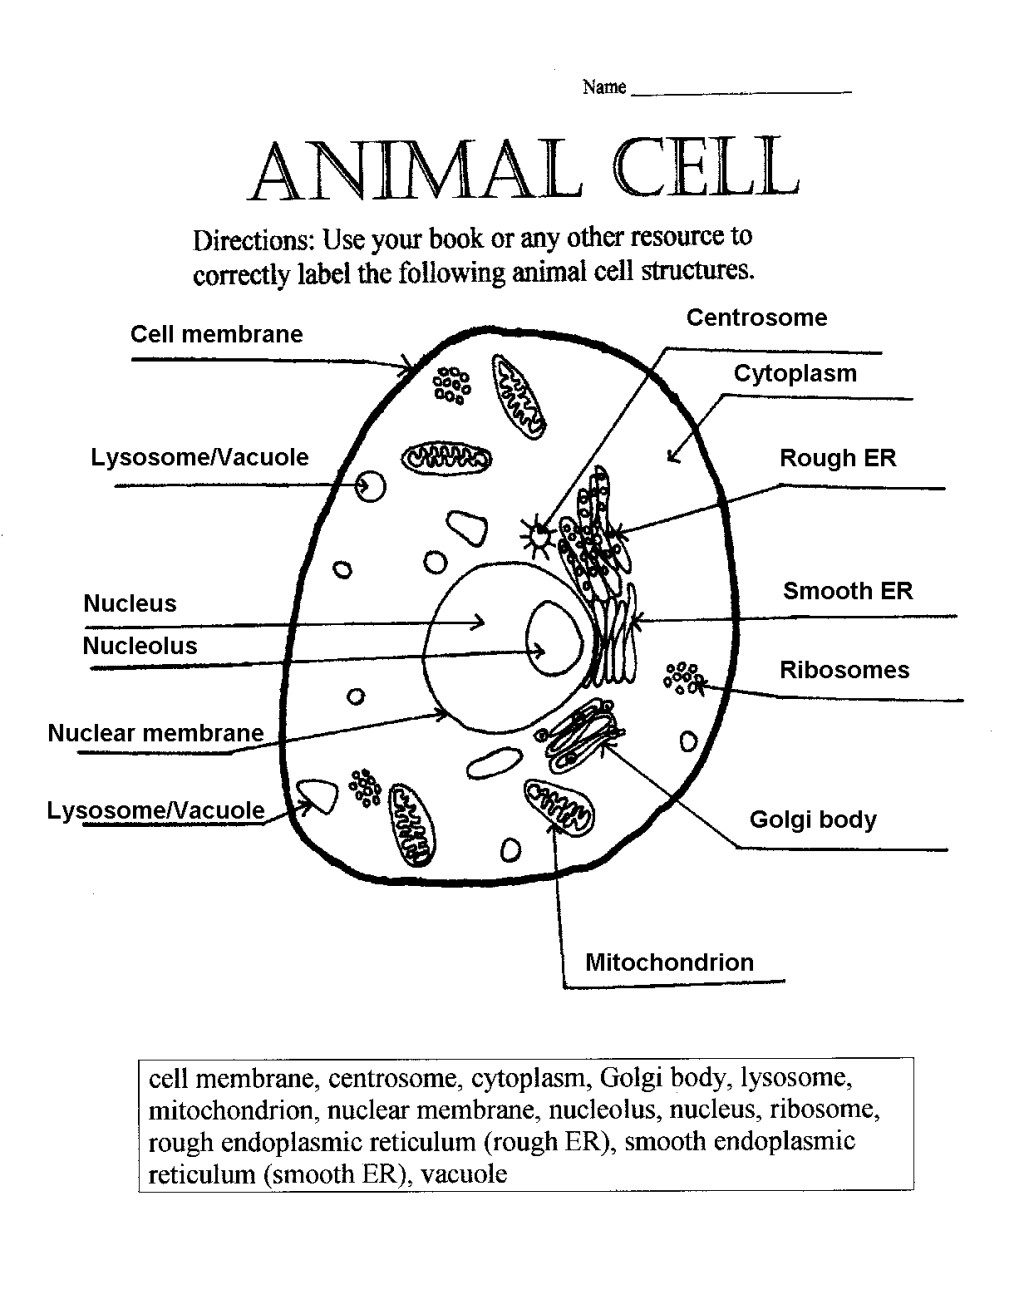 Download Animal Cell Sketch at PaintingValley.com | Explore ...